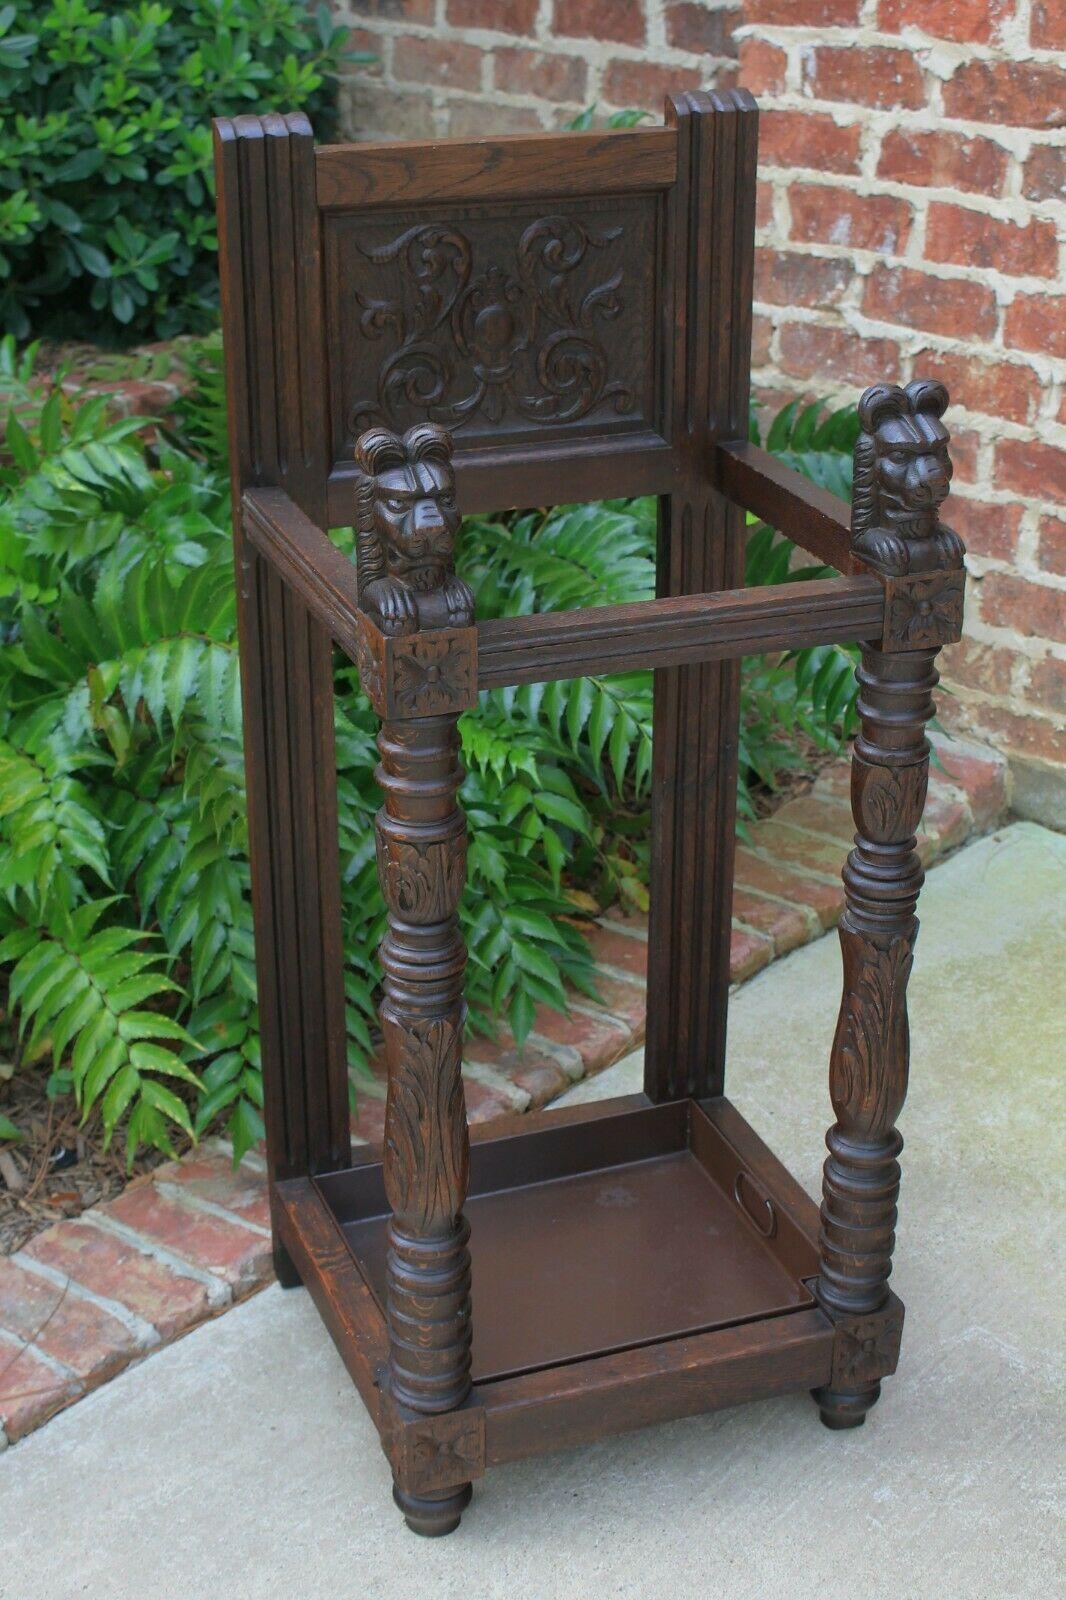 Antique English oak Gothic Revival Foyer entry hall tree umbrella stand, cane or stick stand and drip pan c. 1890s

Charming antique English umbrella stand~~perfect for a entry hall or mudroom for umbrellas or canes~~use it as a decorative piece